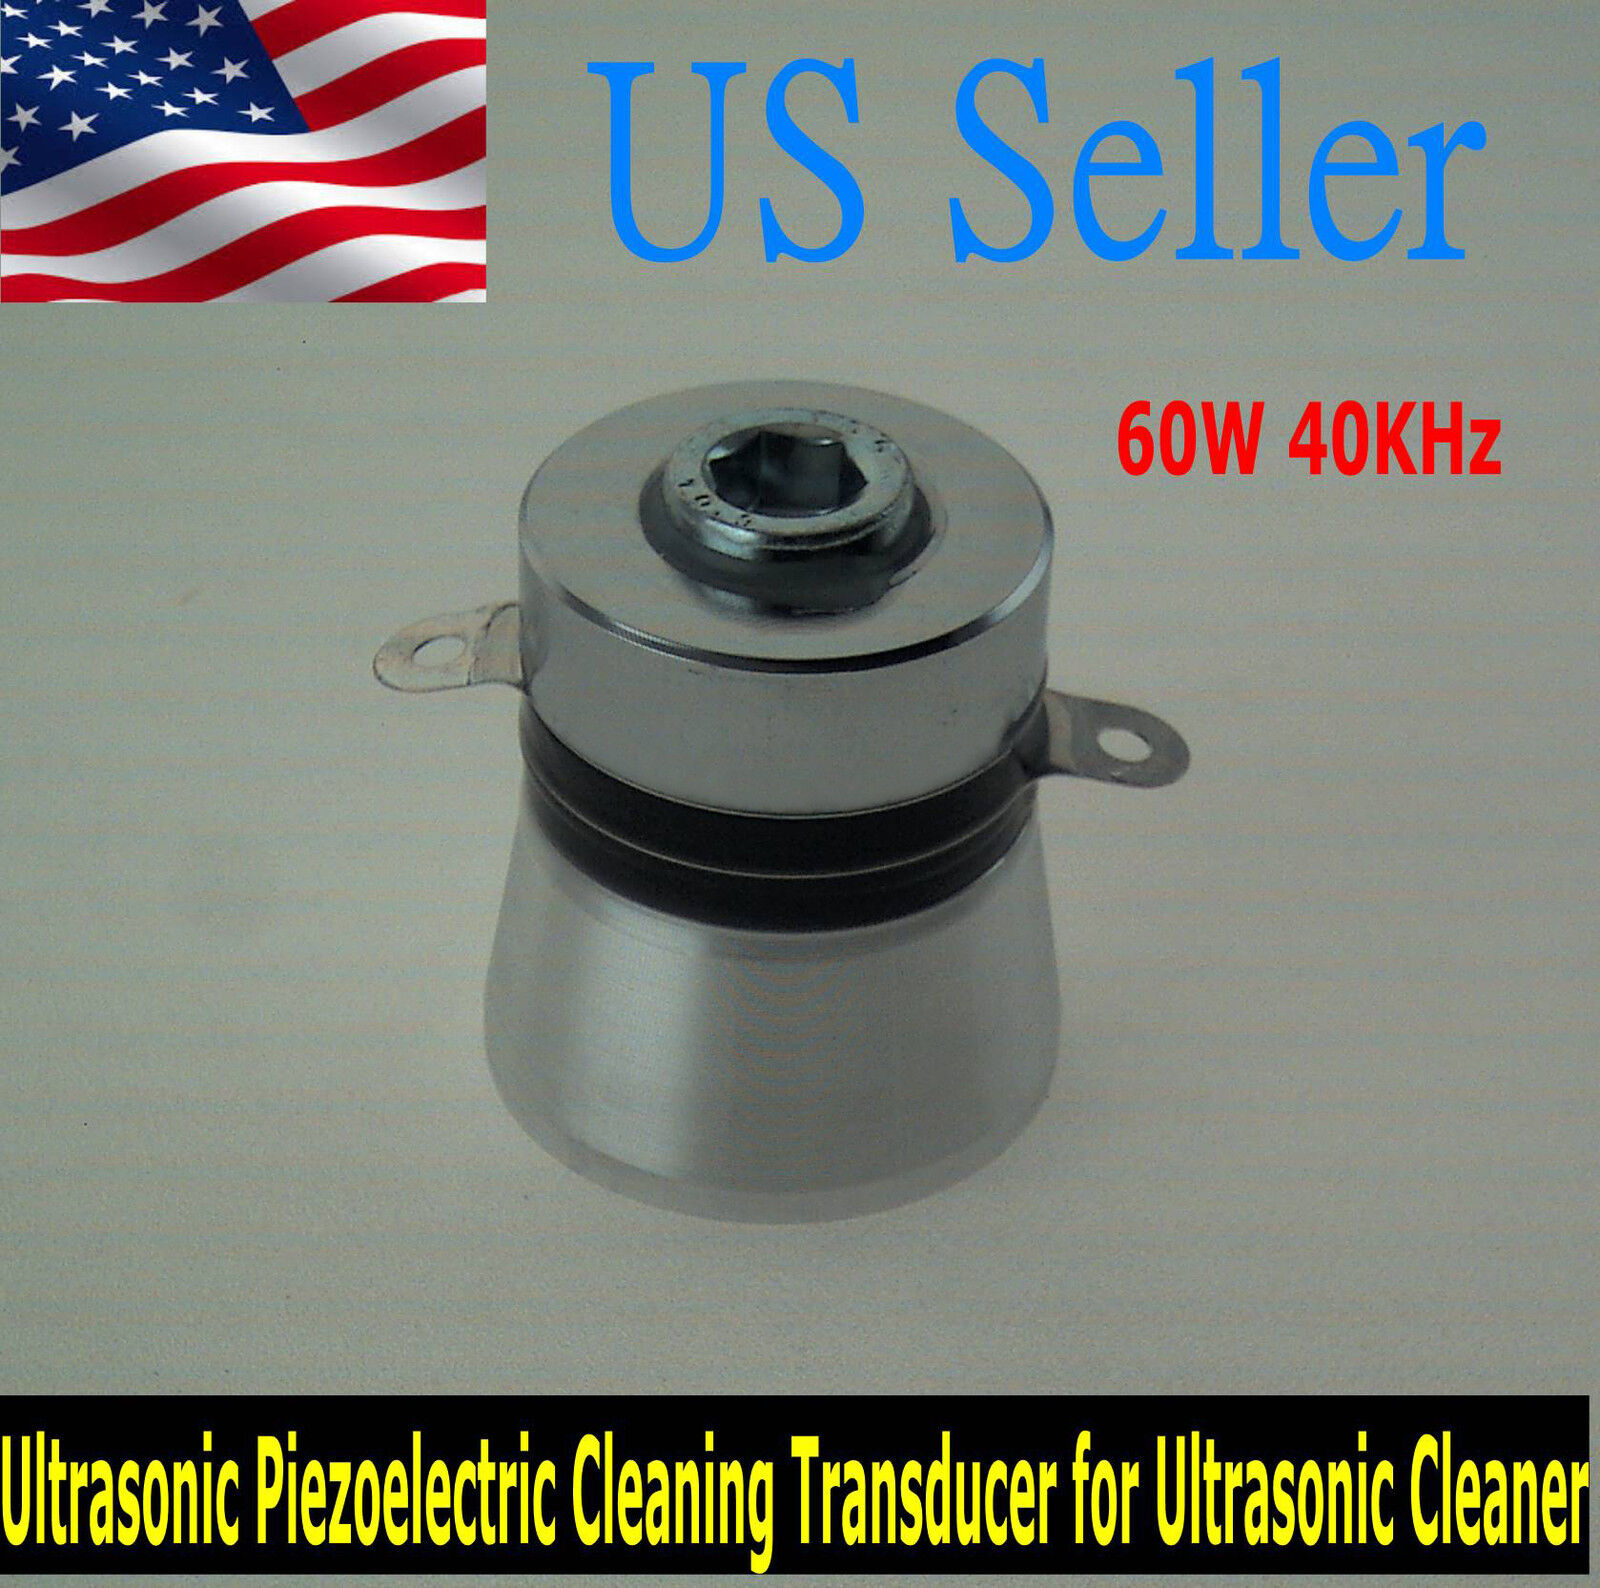 60W 40KHz Ultrasonic Piezoelectric Cleaning Transducer for Ultrasonic Cleaner